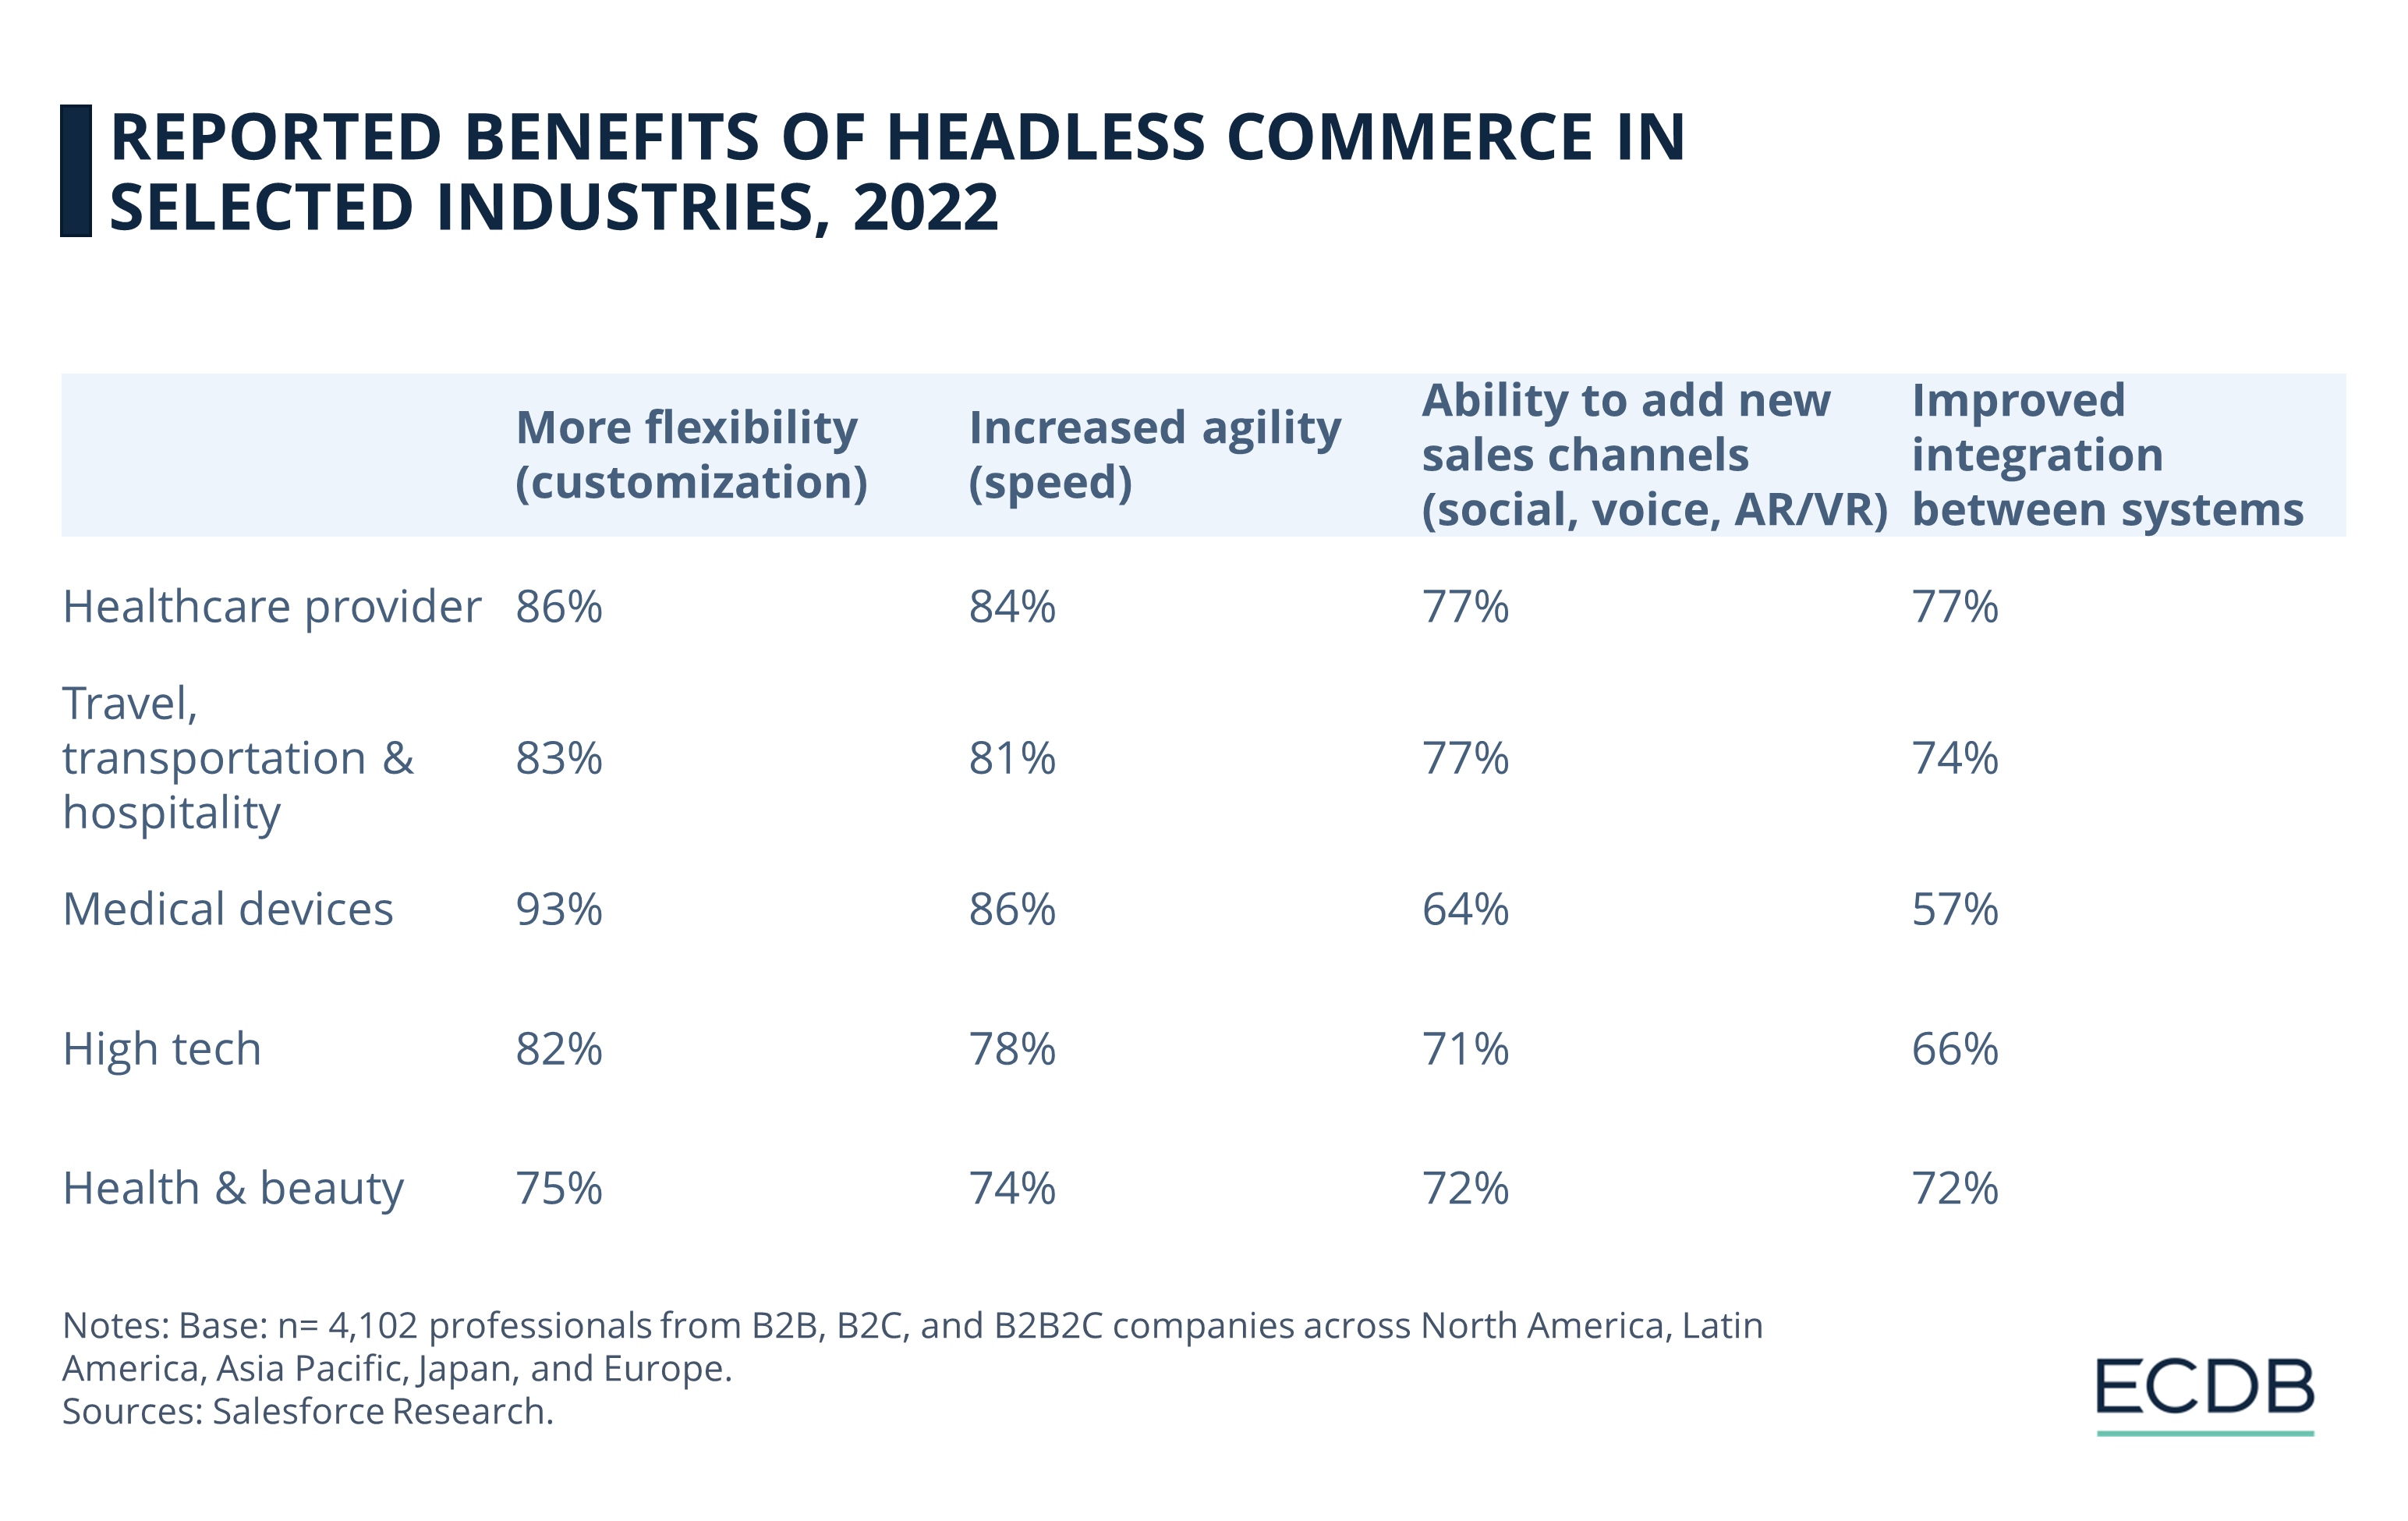 Reported Benefits of Headless Commerce in Selected Industries, 2022